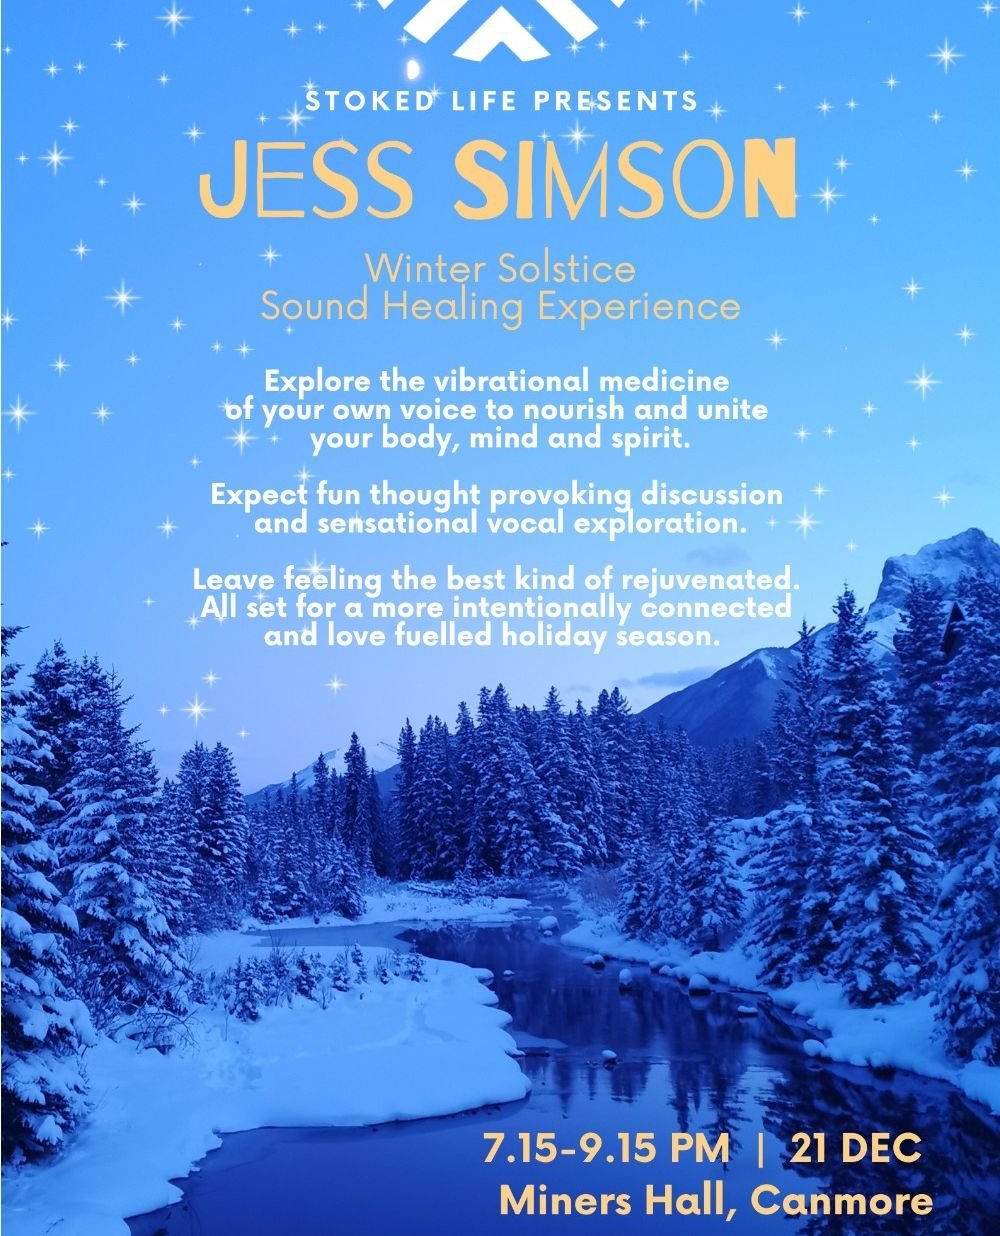 Did you know that the EXACT time of the winter solstice this year for Alberta will be at 8.27pm on December 21st?! ⁠
⁠
RIGHT IN THE MIDDLE OF OUR SOUND HEALING EXPERIENCE!⁠
⁠
I can only imagine being in a reflective Self connected state during this t